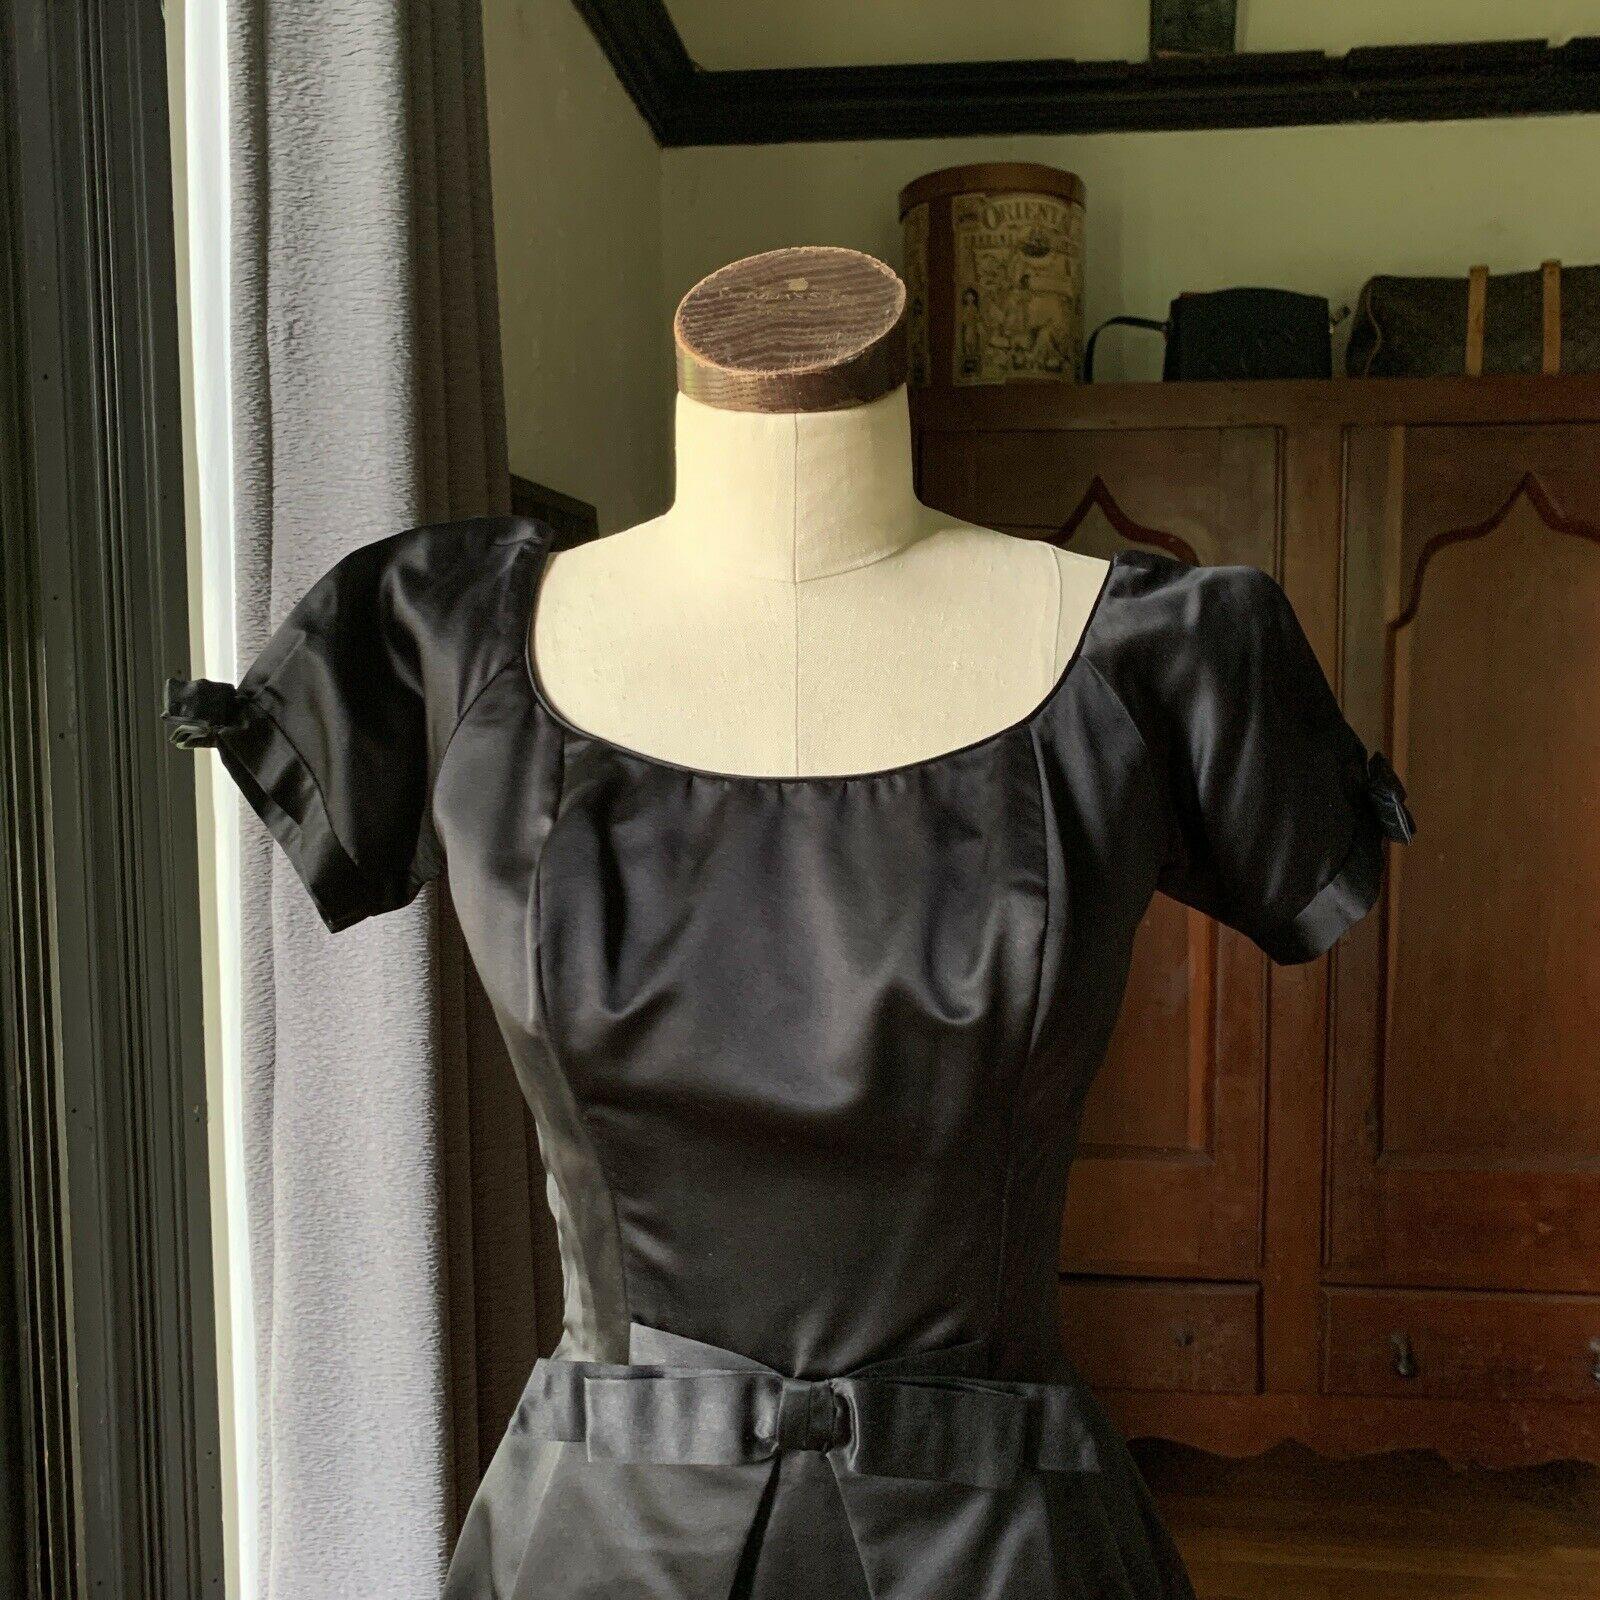 Ceil Chapman, 1950's Era, Pleated Front and Back Panels, Front Bow, Open Top Puff Sleeves with Bows on Ends, Round Neck, Bone In Front and Sides, Back Zipper, Hook and Eye Black Closure, Iconic Chapman Label Intact, Gorgeous Black Satin, Size